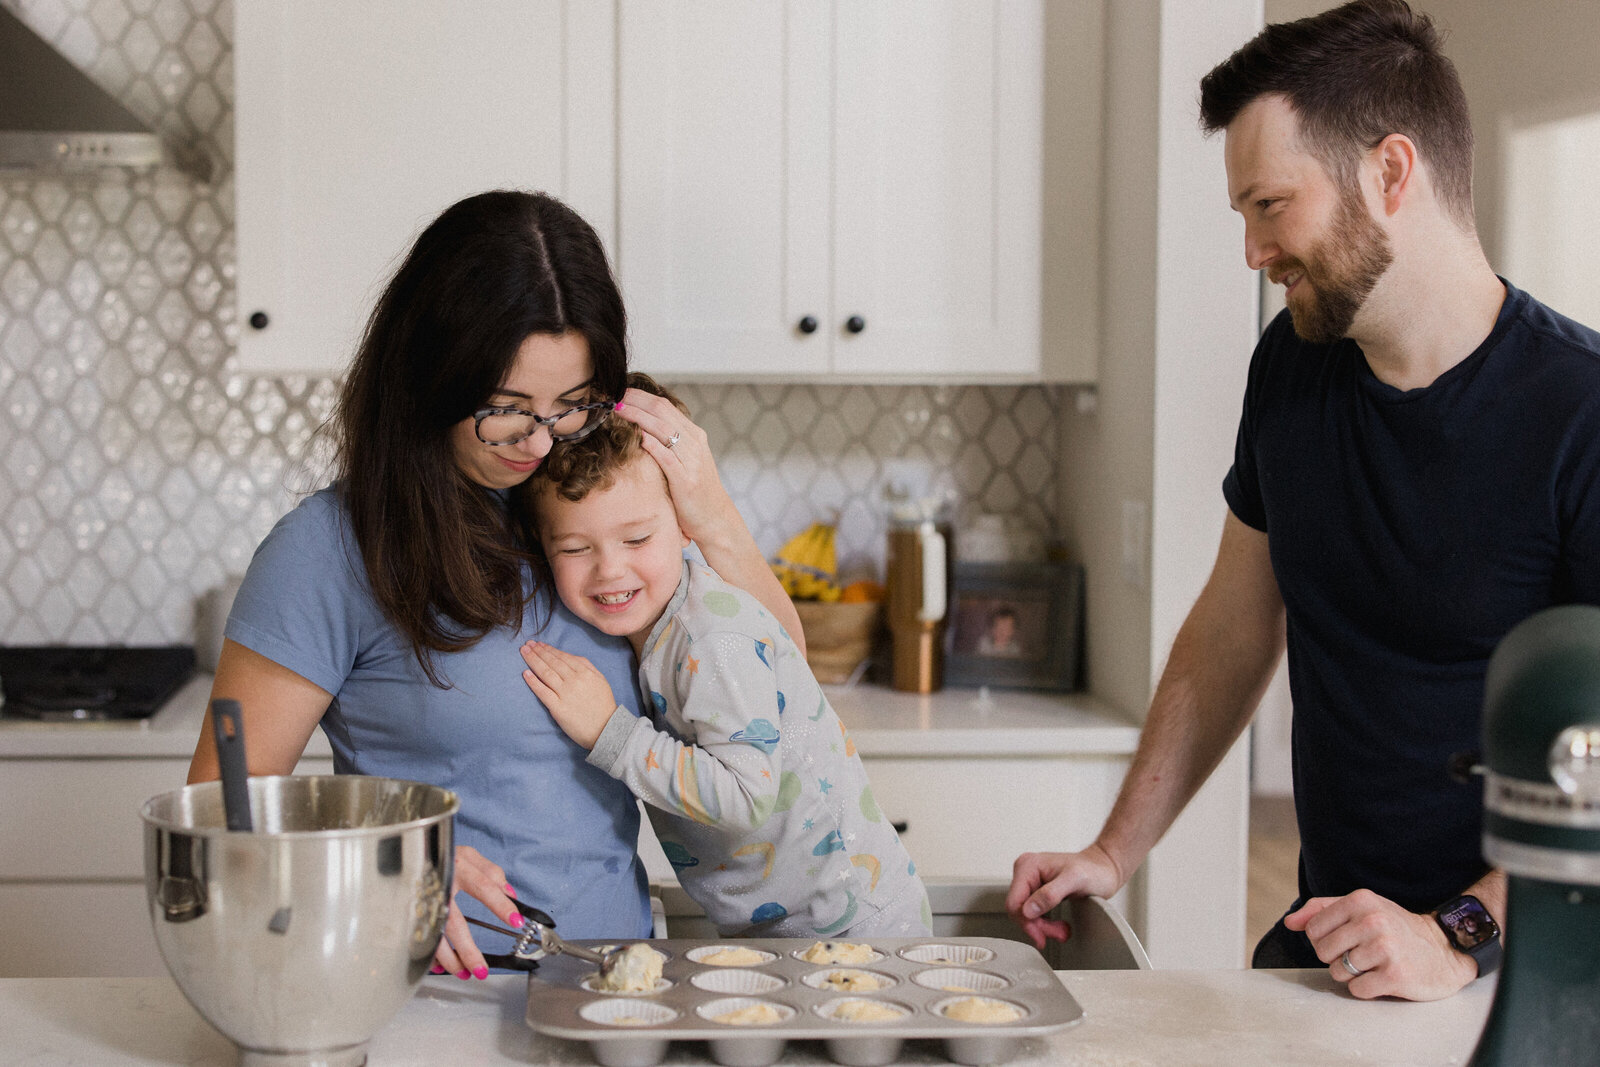 Mom holds son close while dad smiles at the two of them as they are all baking in the kitchen